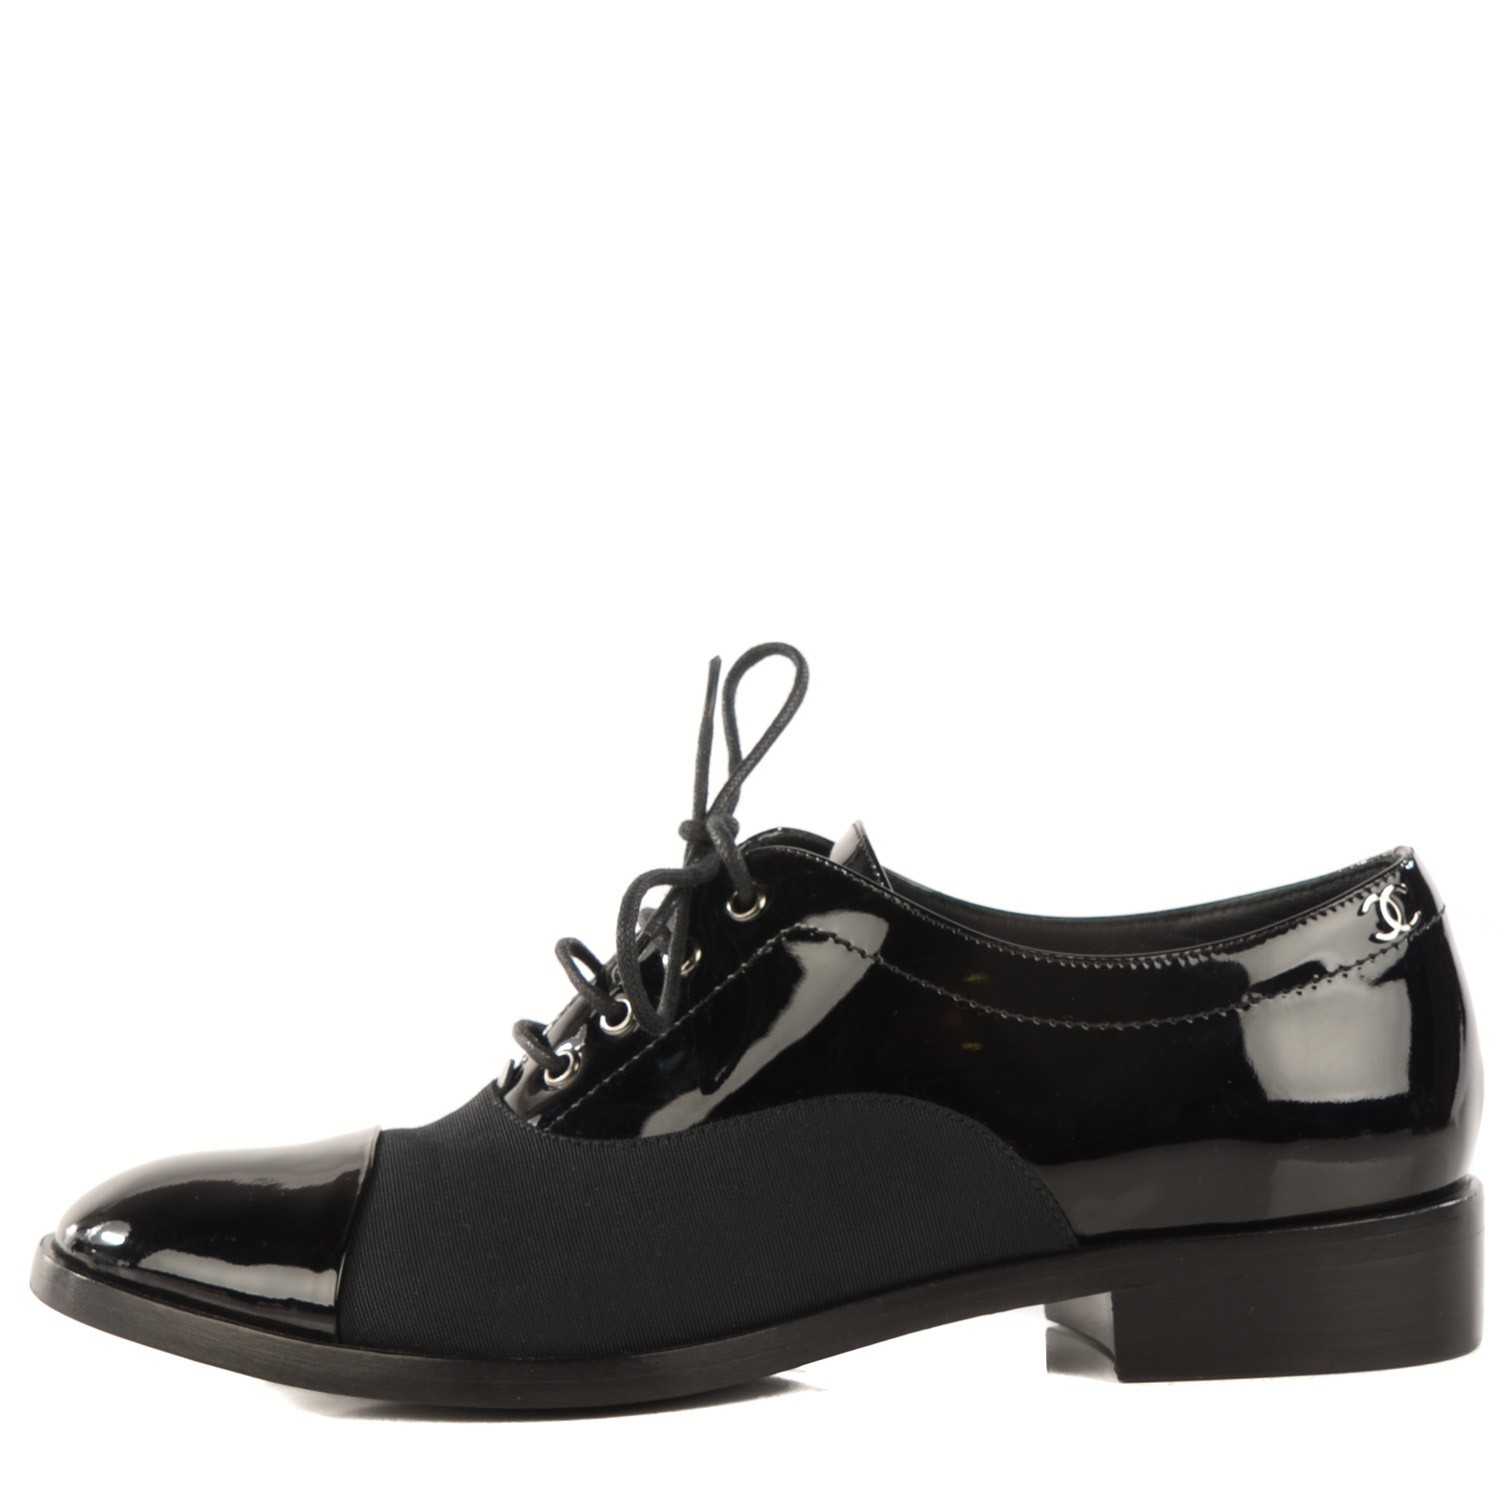 chanel lace up oxfords